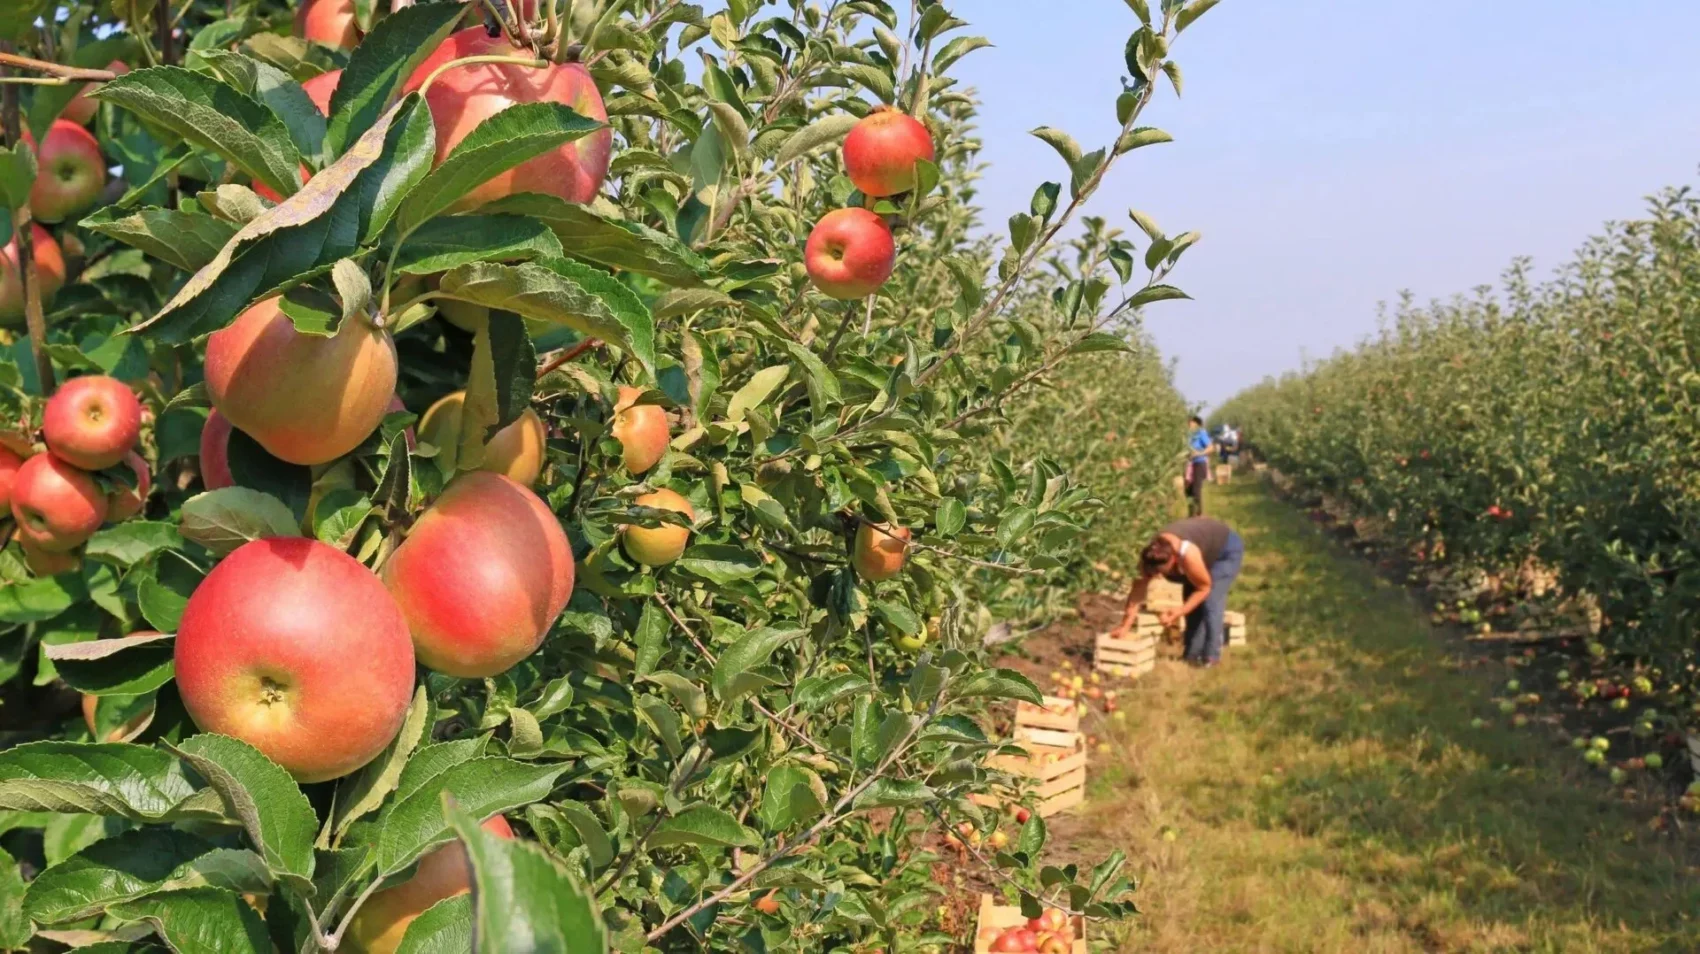 Apple pickers in a row